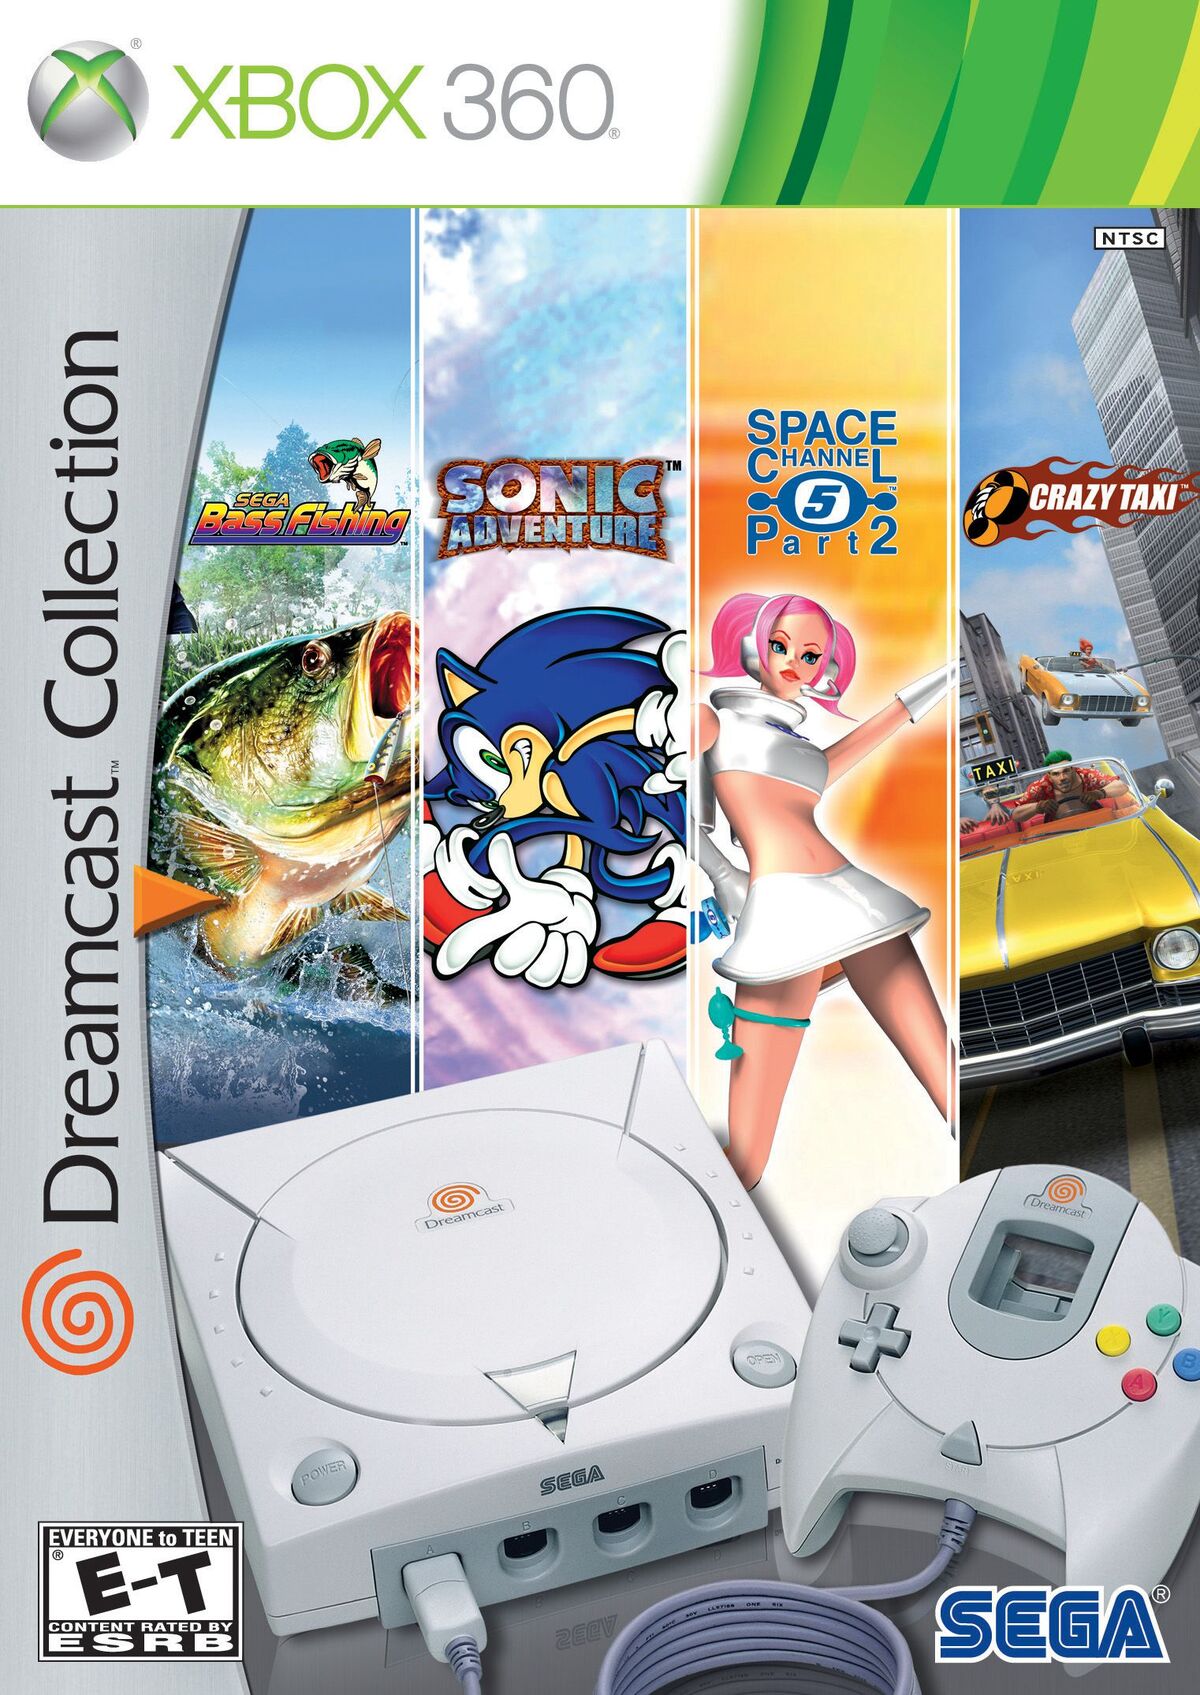 The Sega Dreamcast: Microsoft on consoles before the days of Xbox